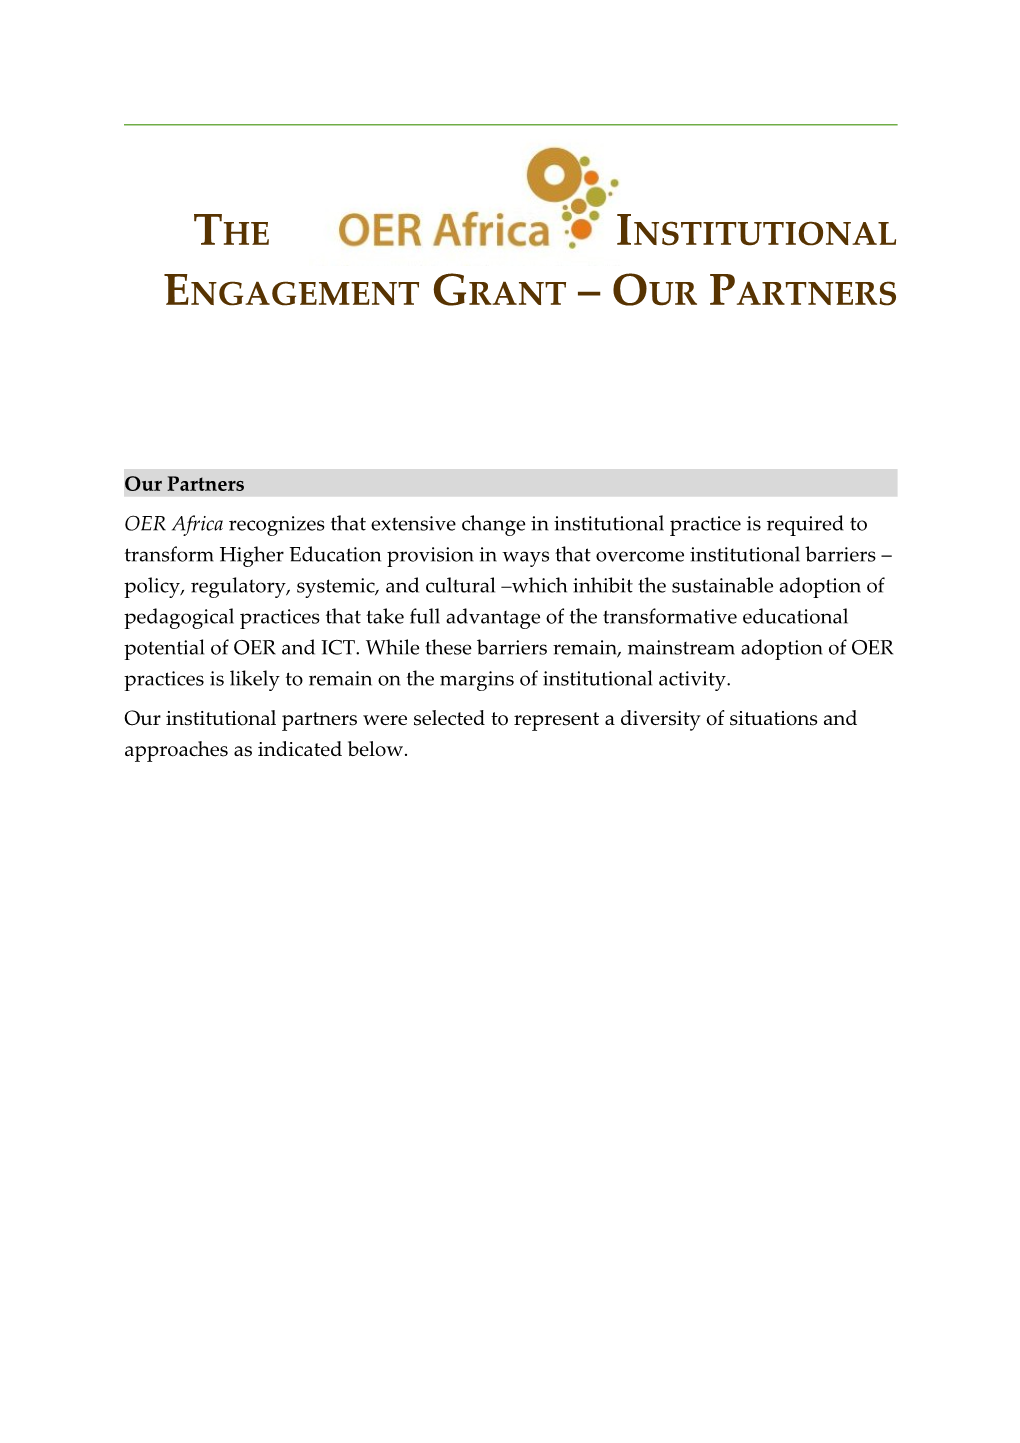 The Institutional Engagement Grant Our Partners